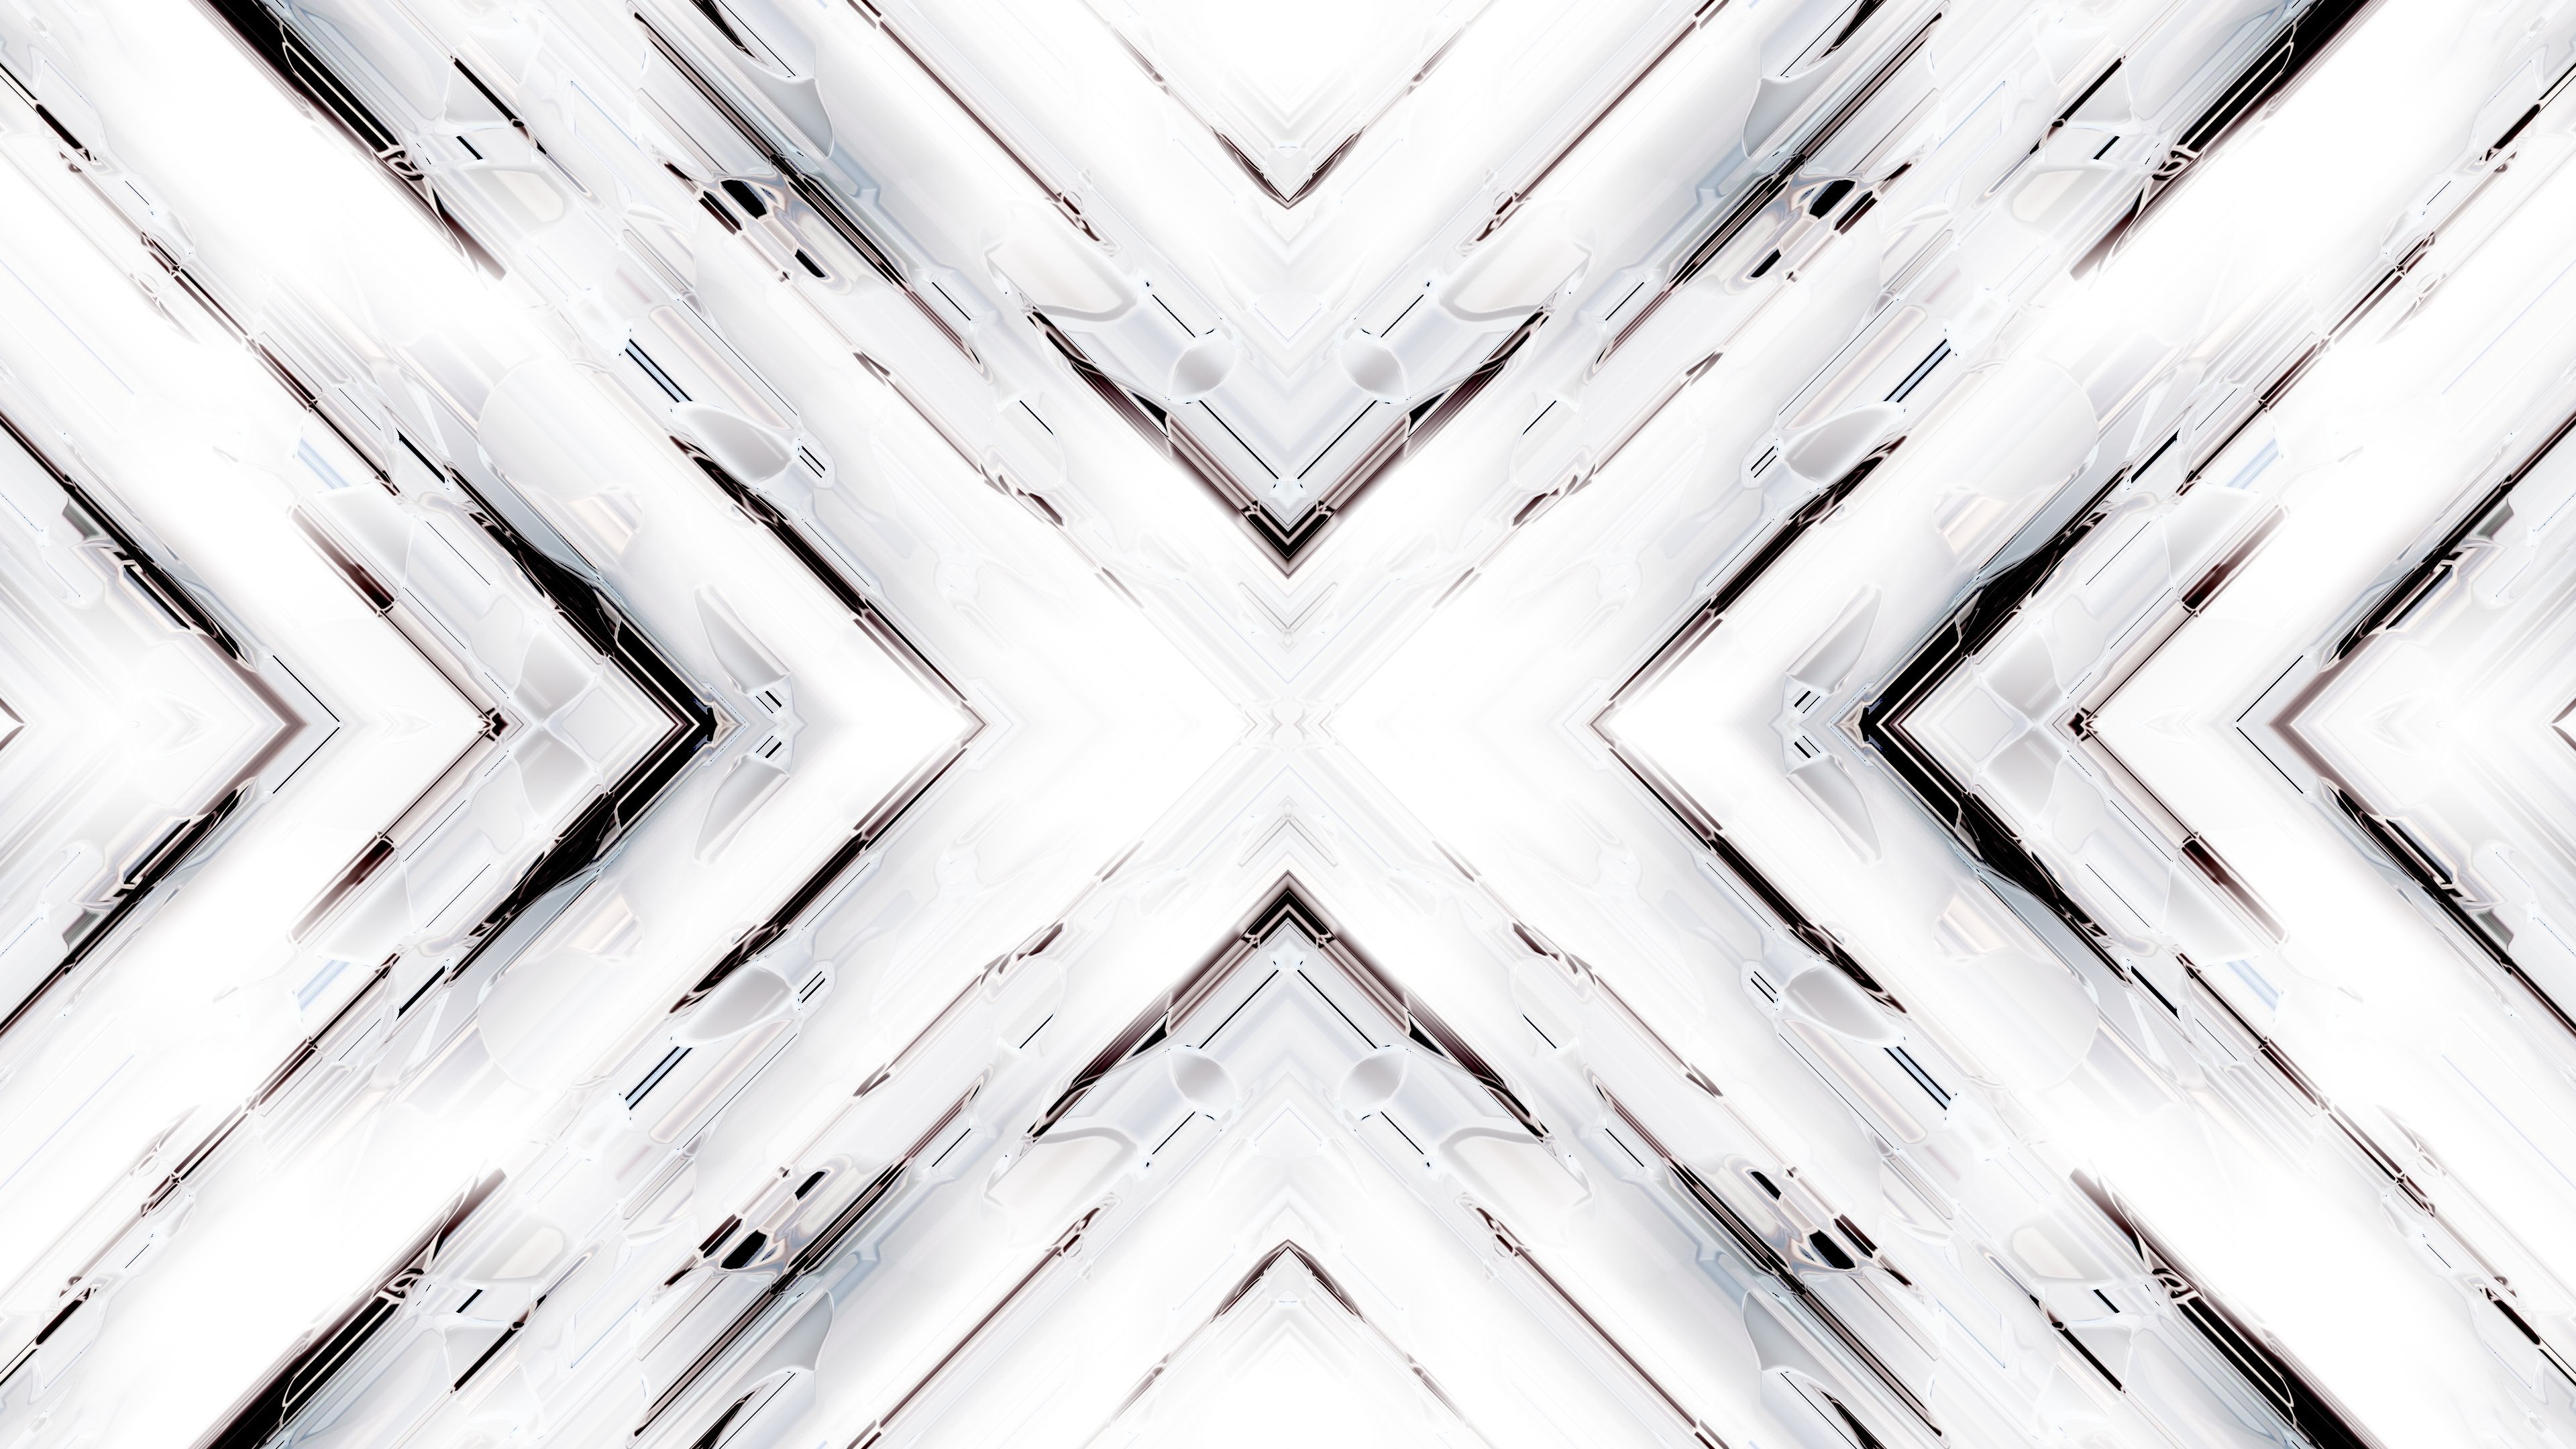 1K Abstract White Pictures  Download Free Images on Unsplash